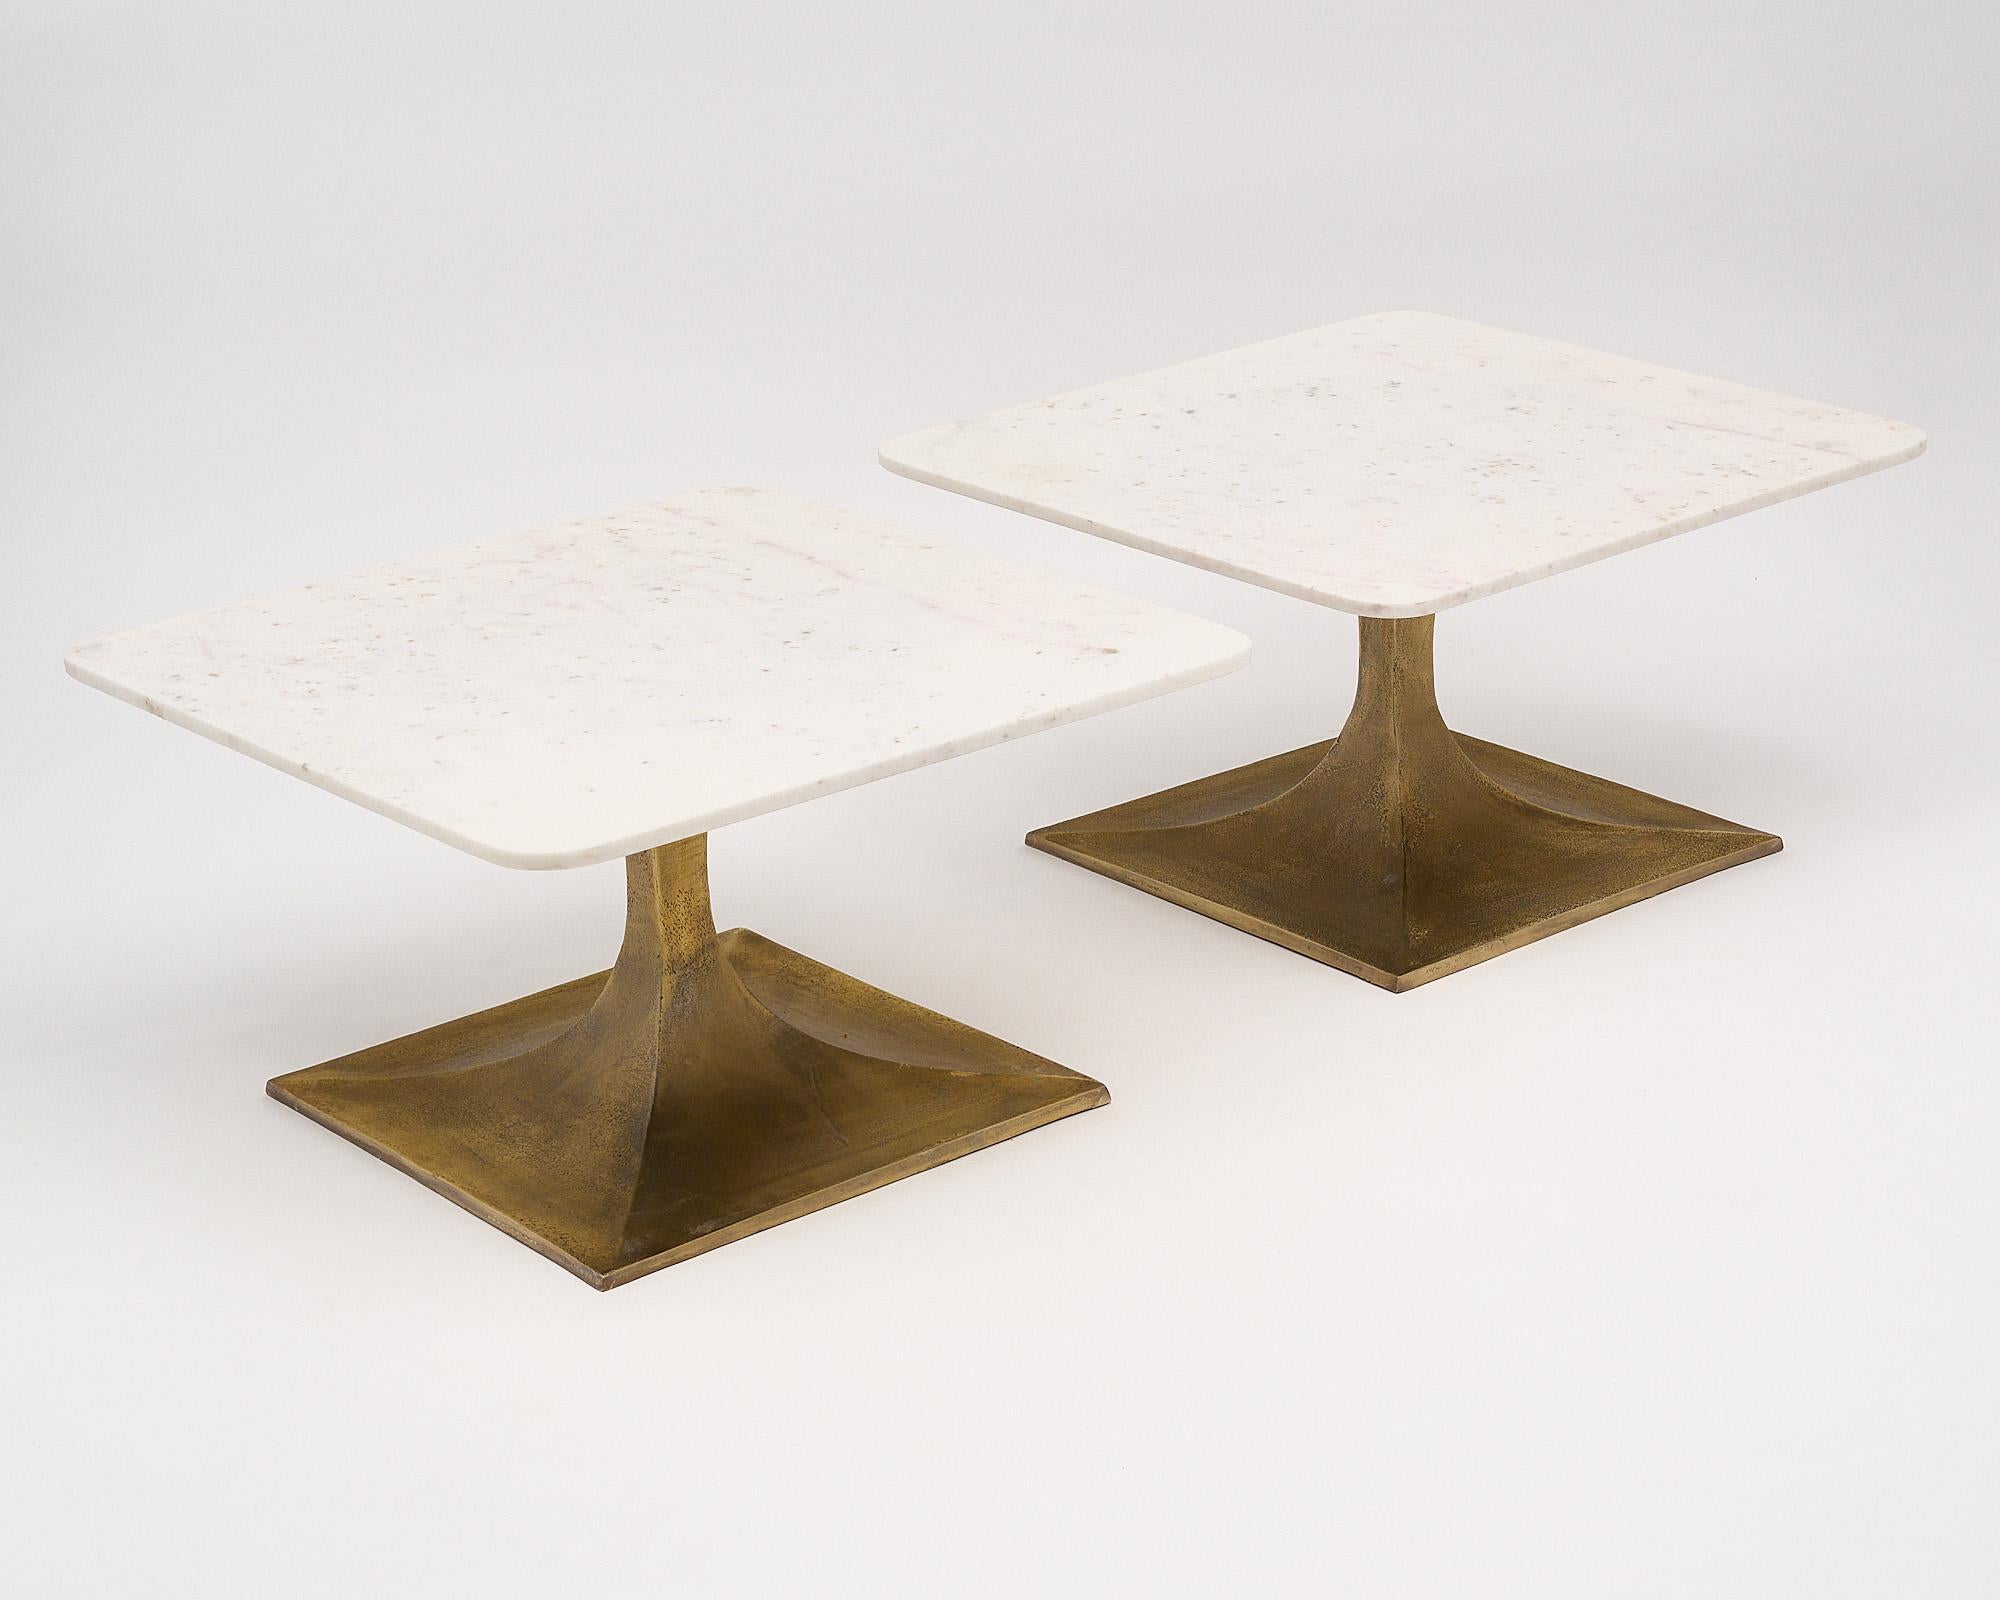 Pair of side tables from France made with bronze tapered bases and Carrara marble slab tops. These tables are originally from the Cartier showroom in Monte Carlo. This square pair has curved corners to bring a softness to the design. We especially